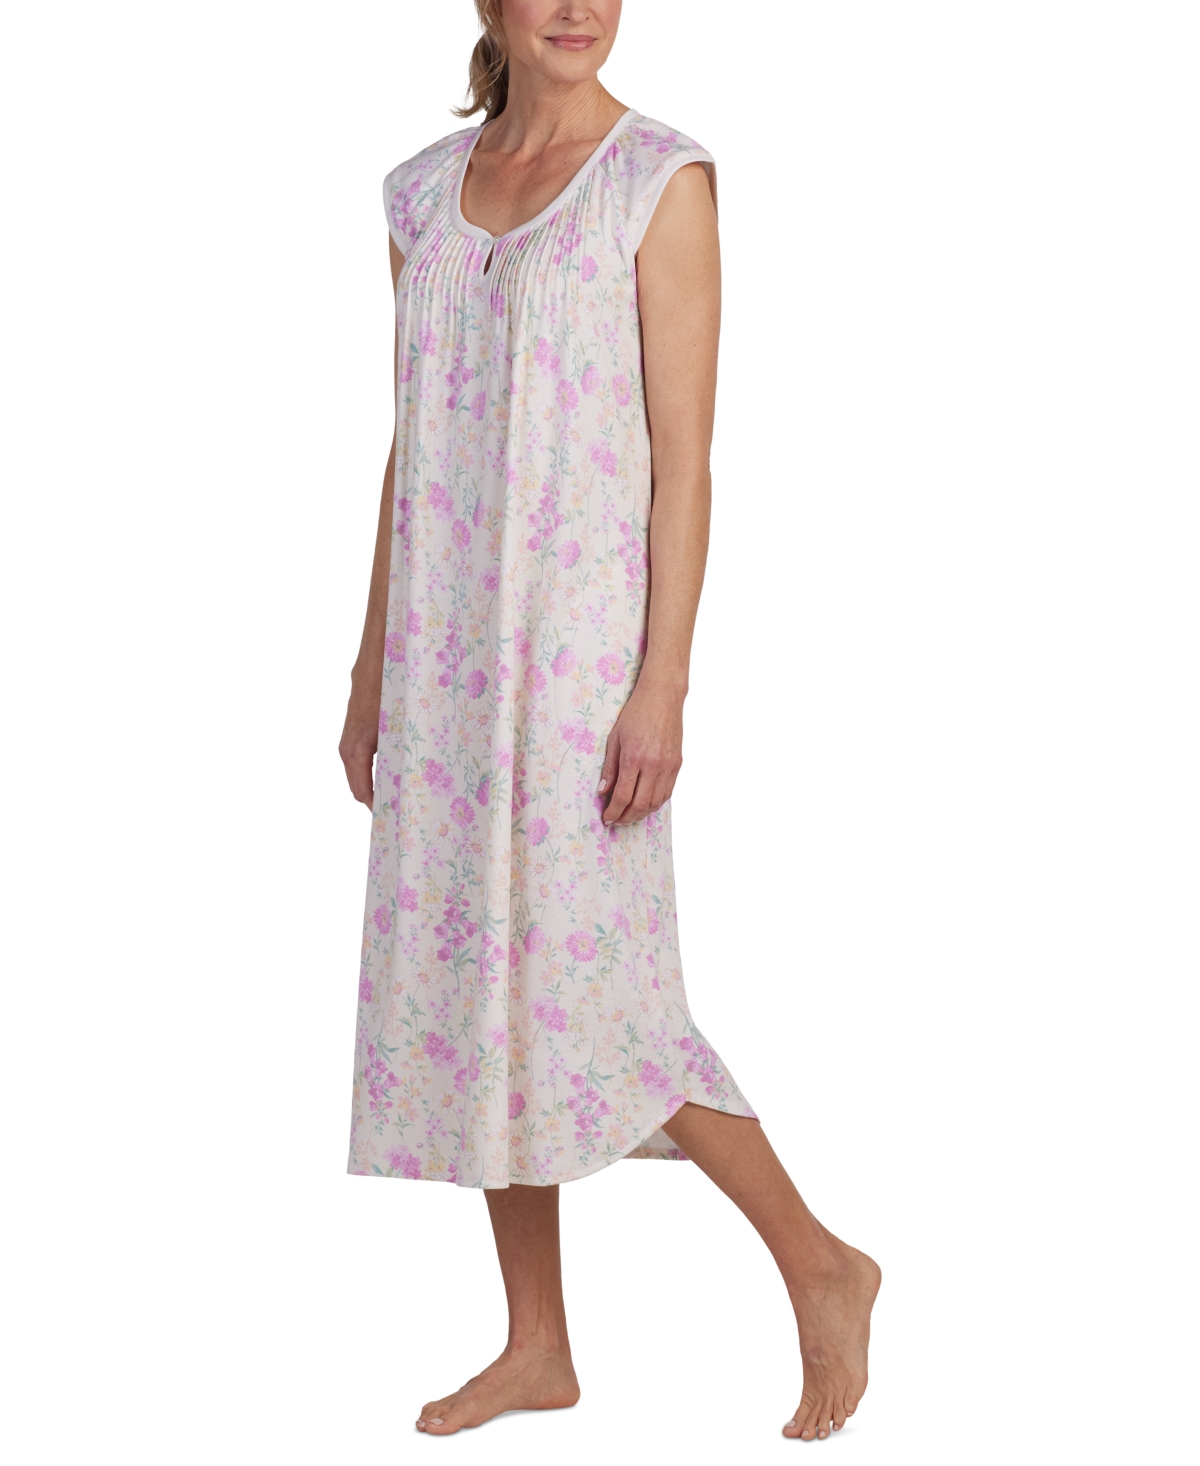 Women's Sleeveless Floral Nightgown - Pink Floral